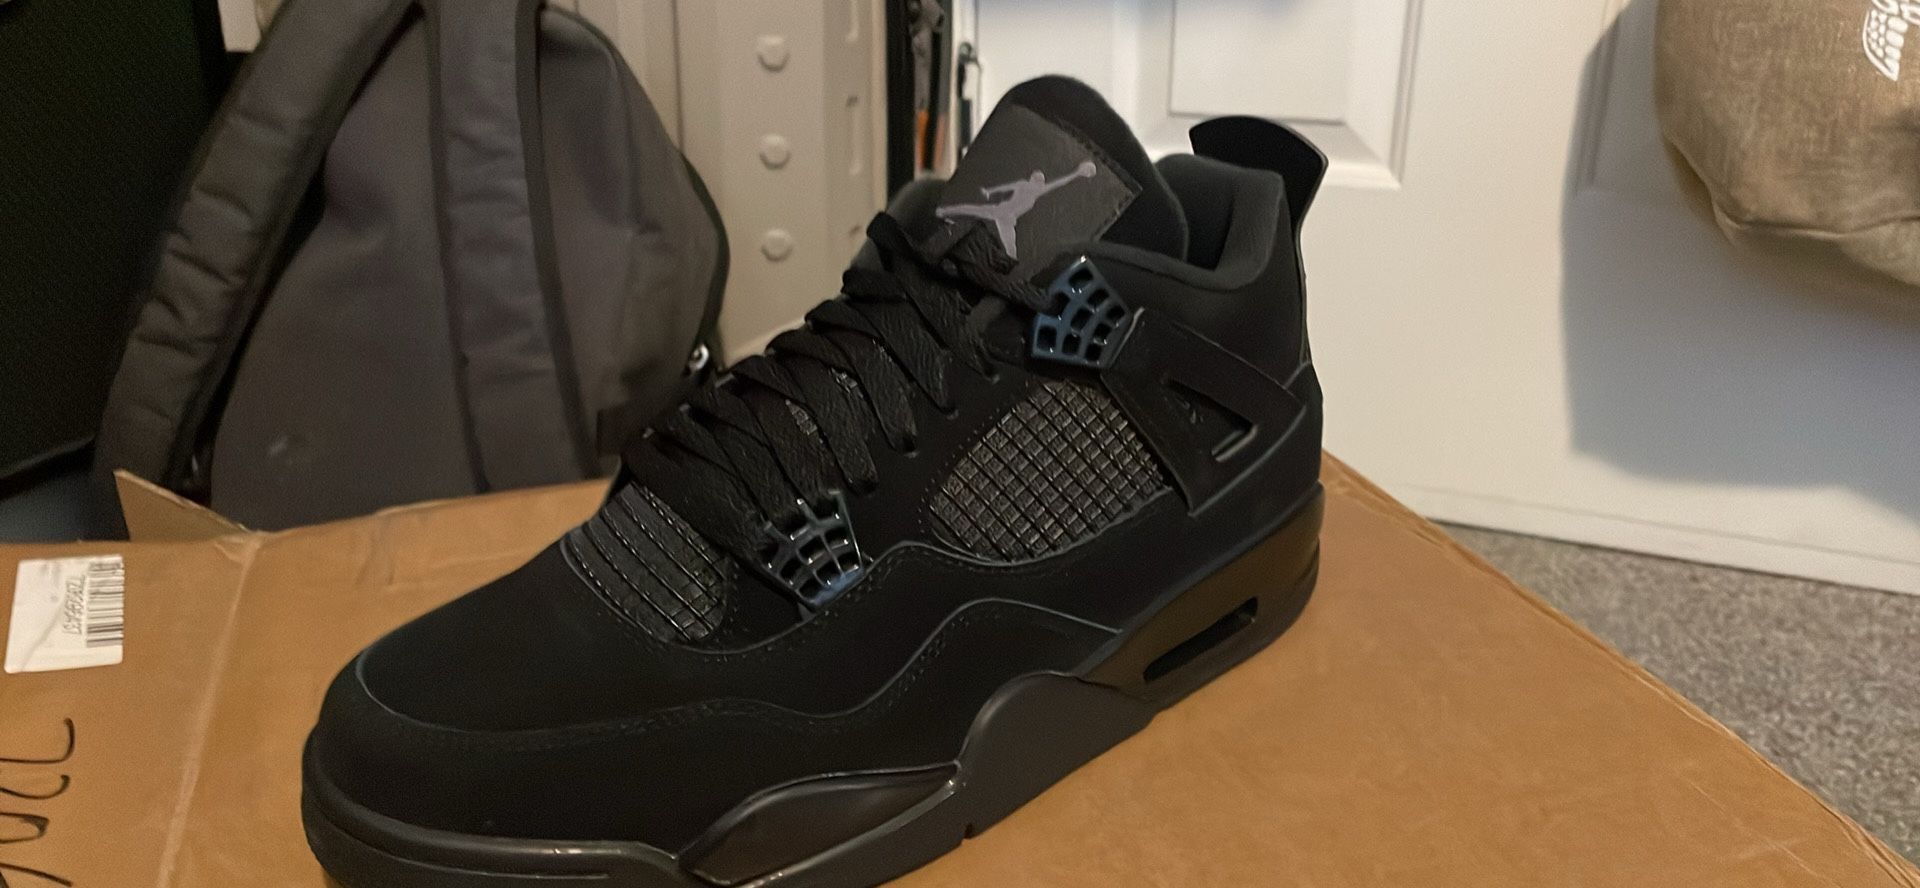 Black Cat 4s (Different Sizes Available)